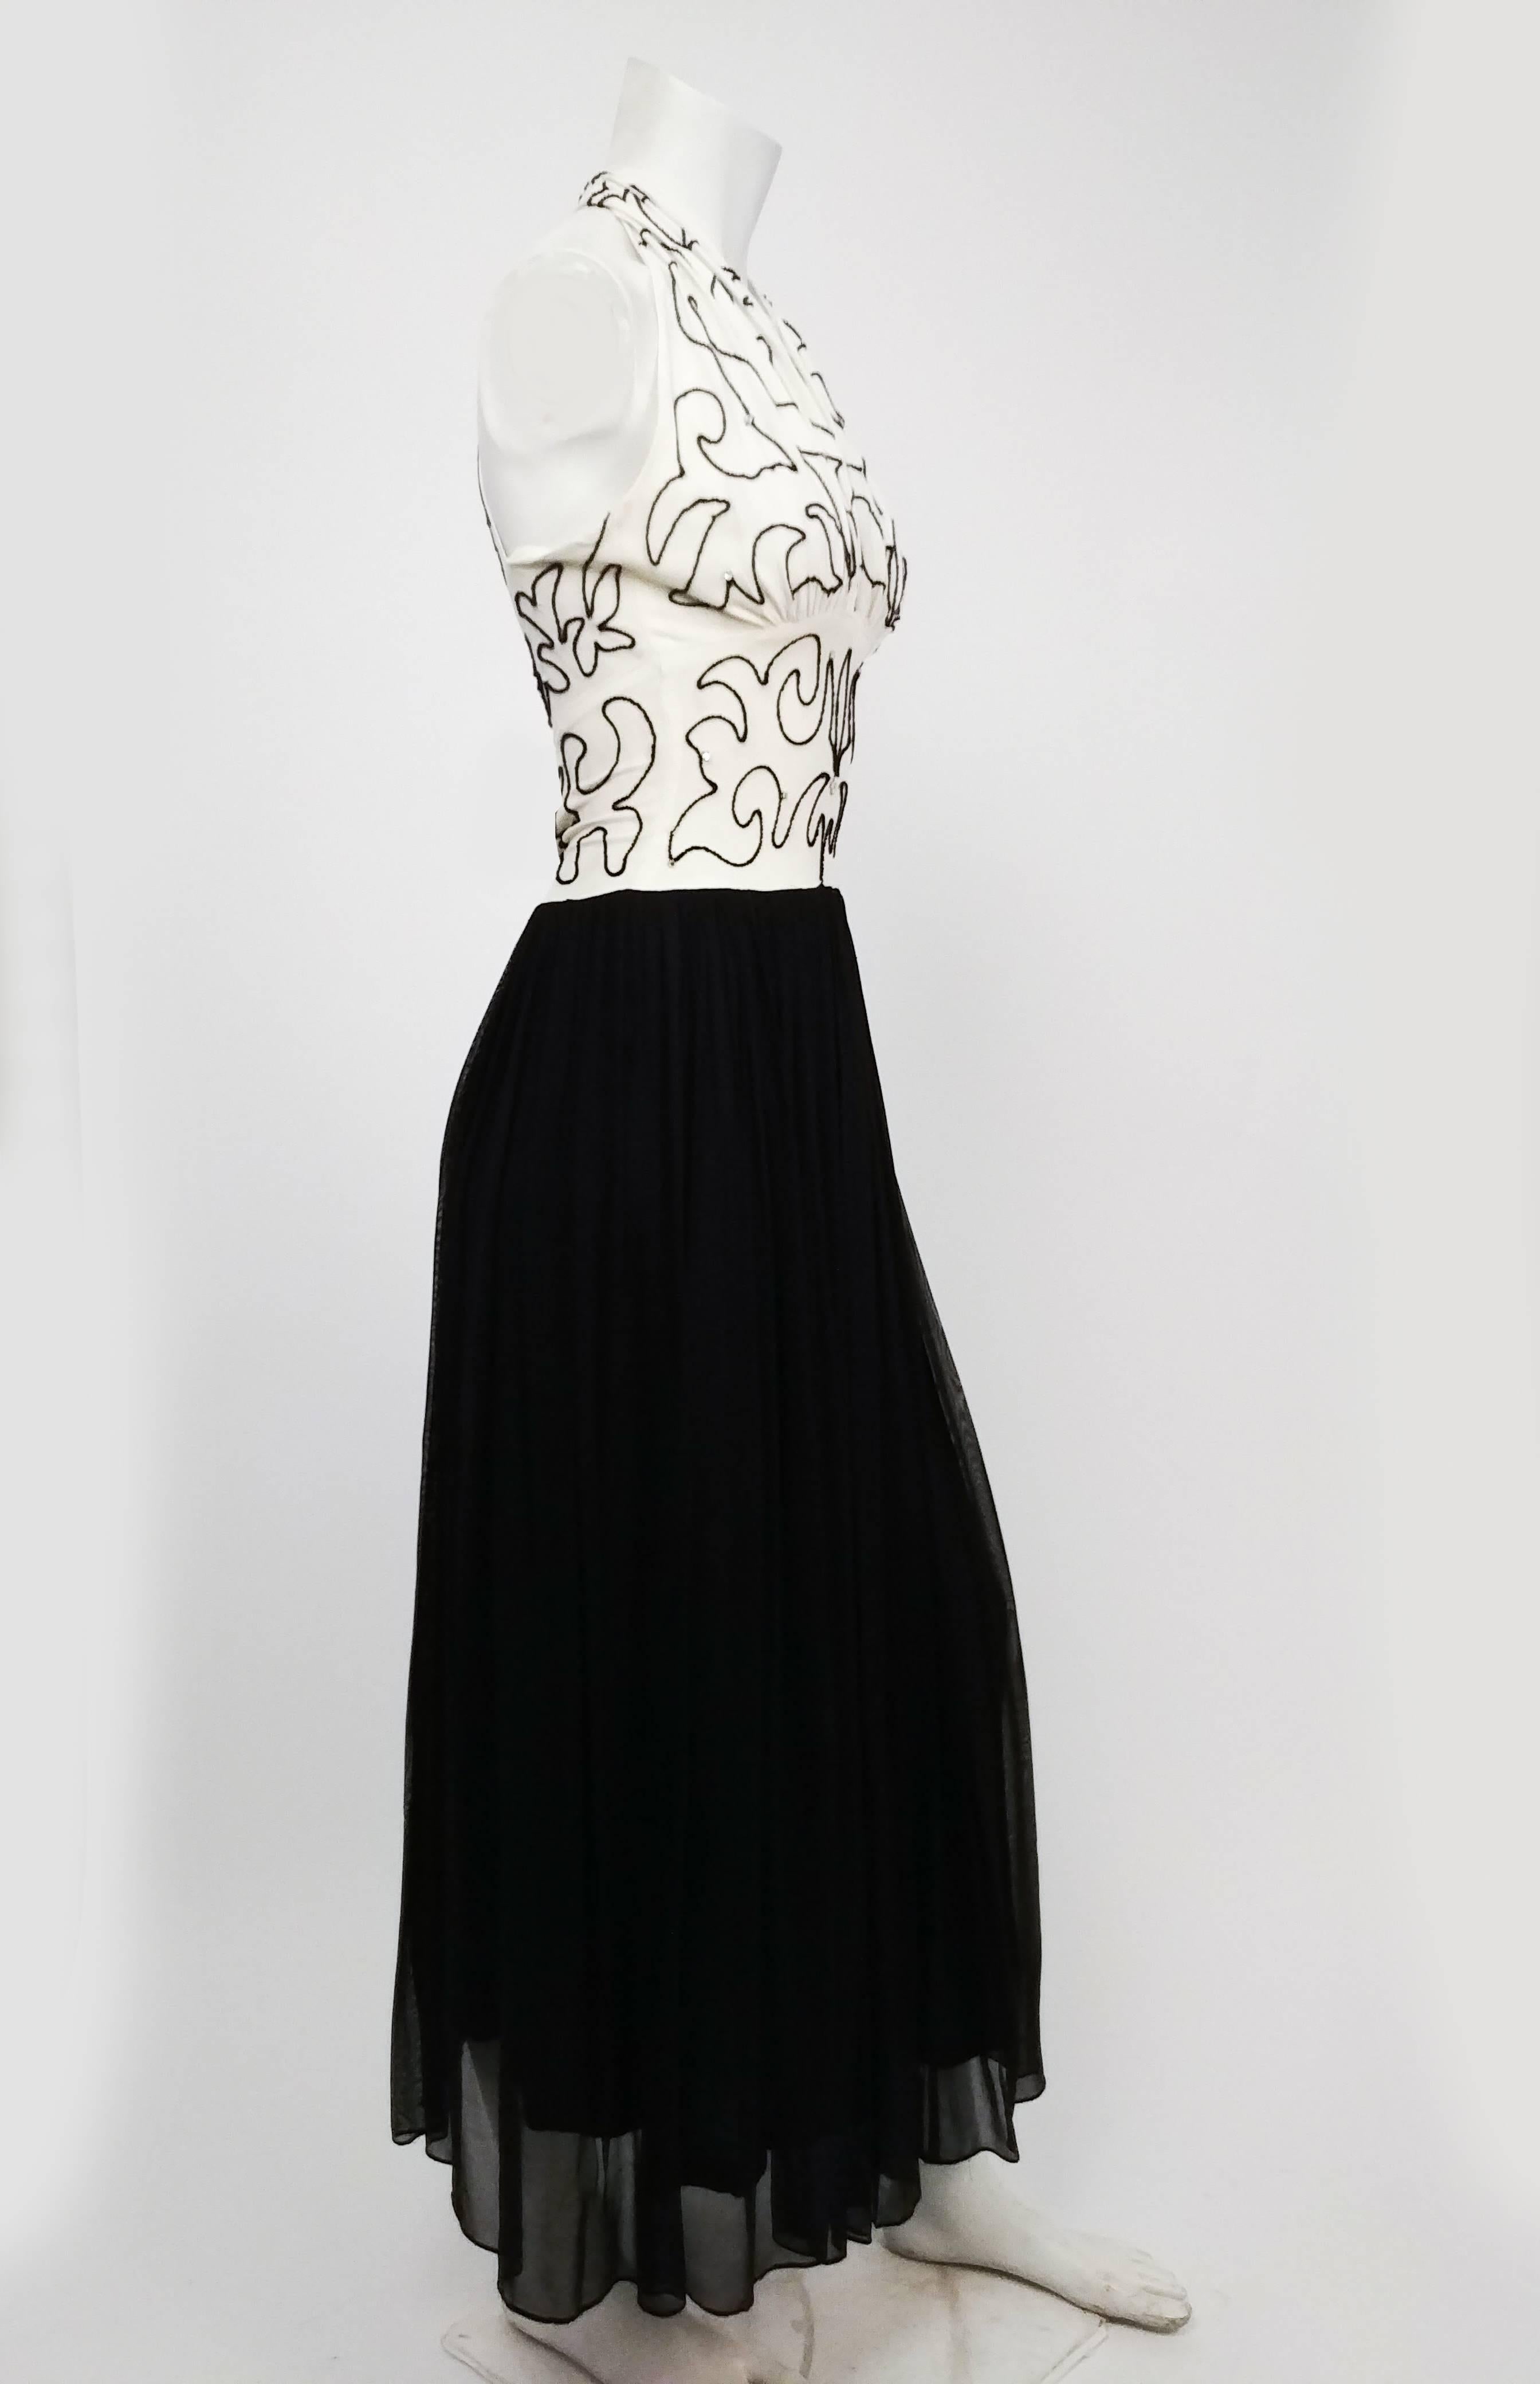 1930s Black & White Beaded Halter Evening Dress. Exquisite white bodice beaded with black beads and rhinestones, deep V neckline with halter straps. Flowing black mesh skirt with plenty of movement. Back closes with hook and eyes, with sexy keyhole